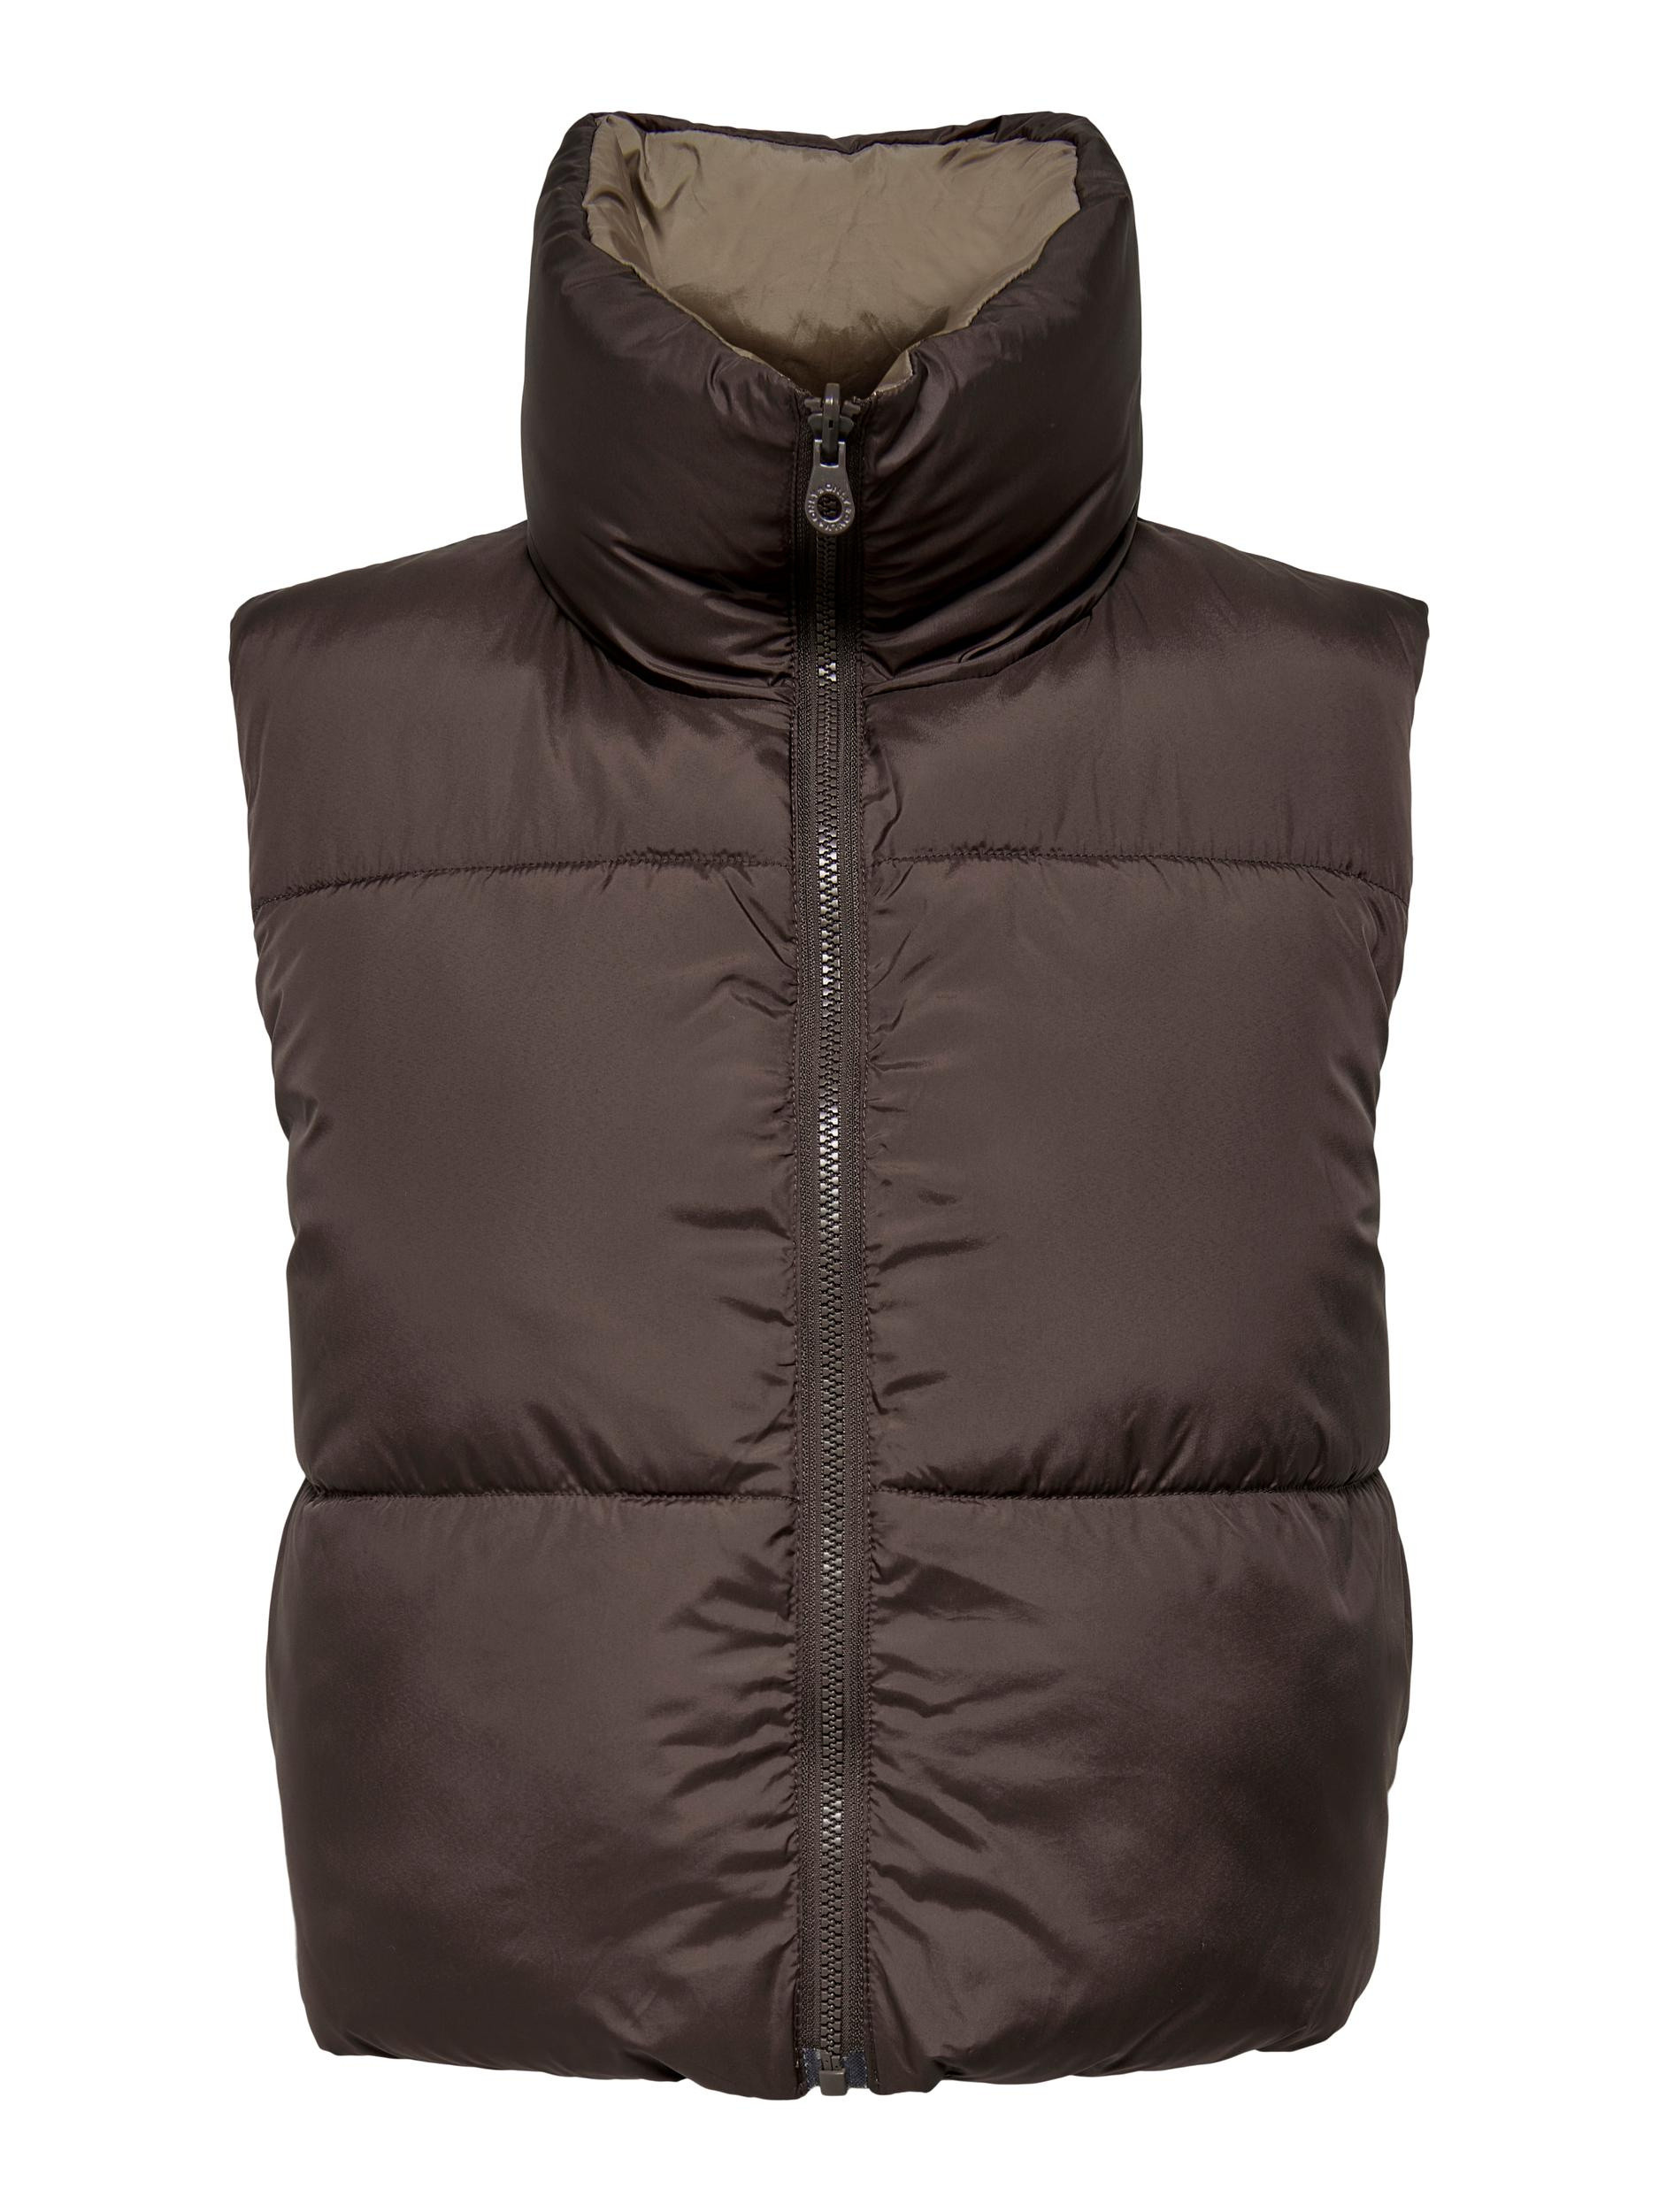 Only - Reversible quilted gilet, Brown, large image number 0